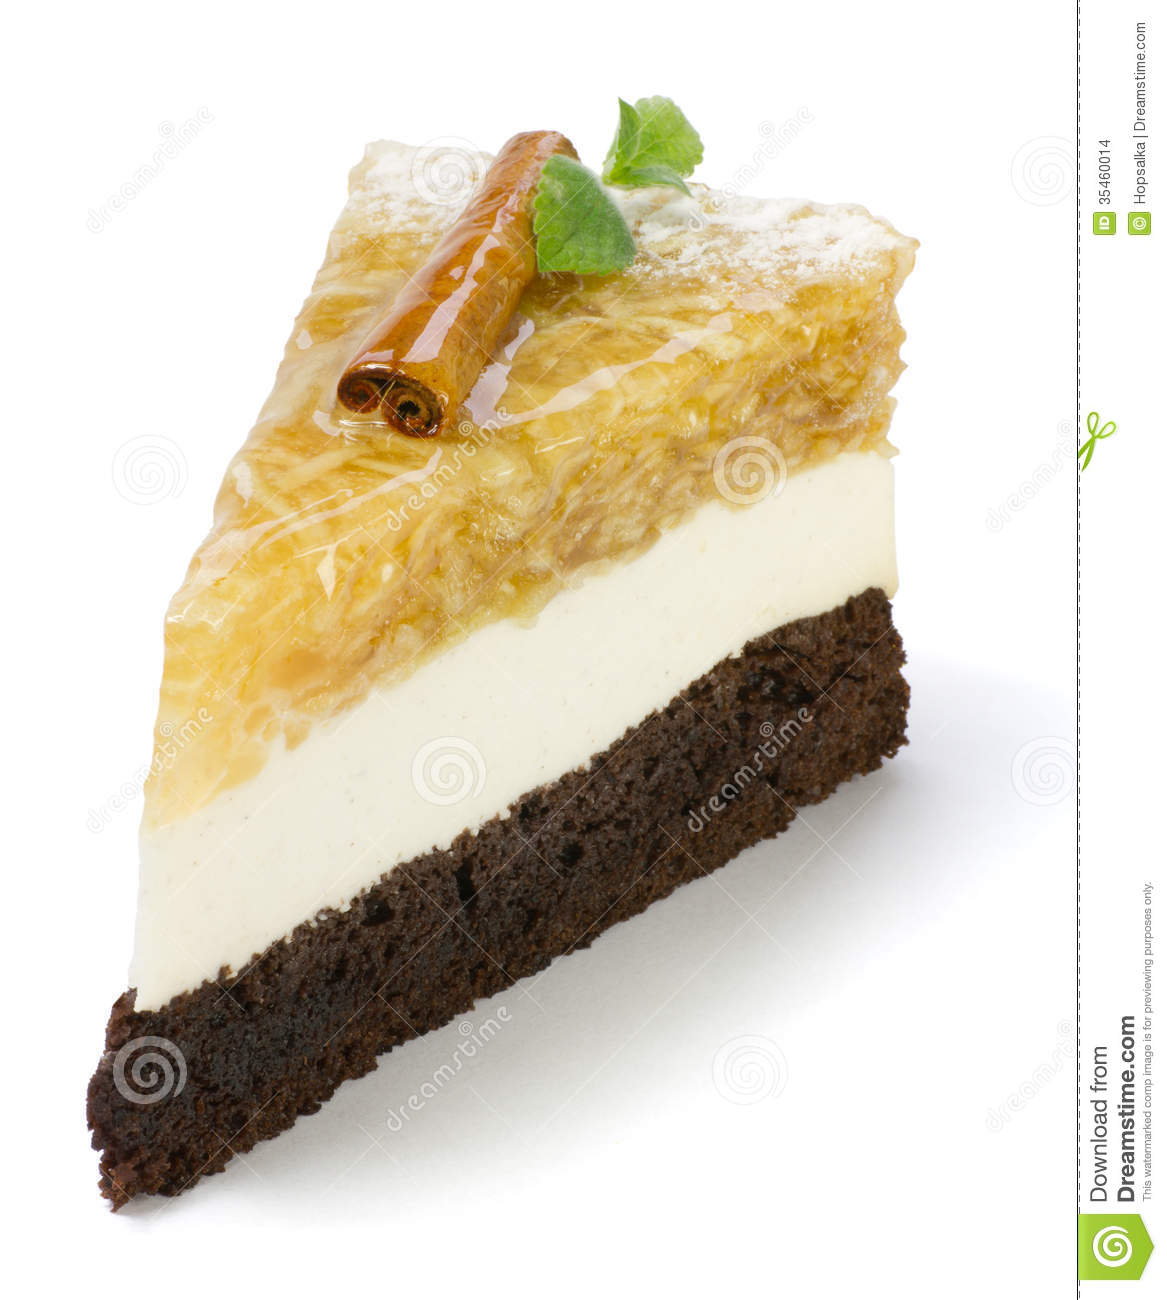 Piece Of An Apple Cake Isolated On White Clipping Path Included